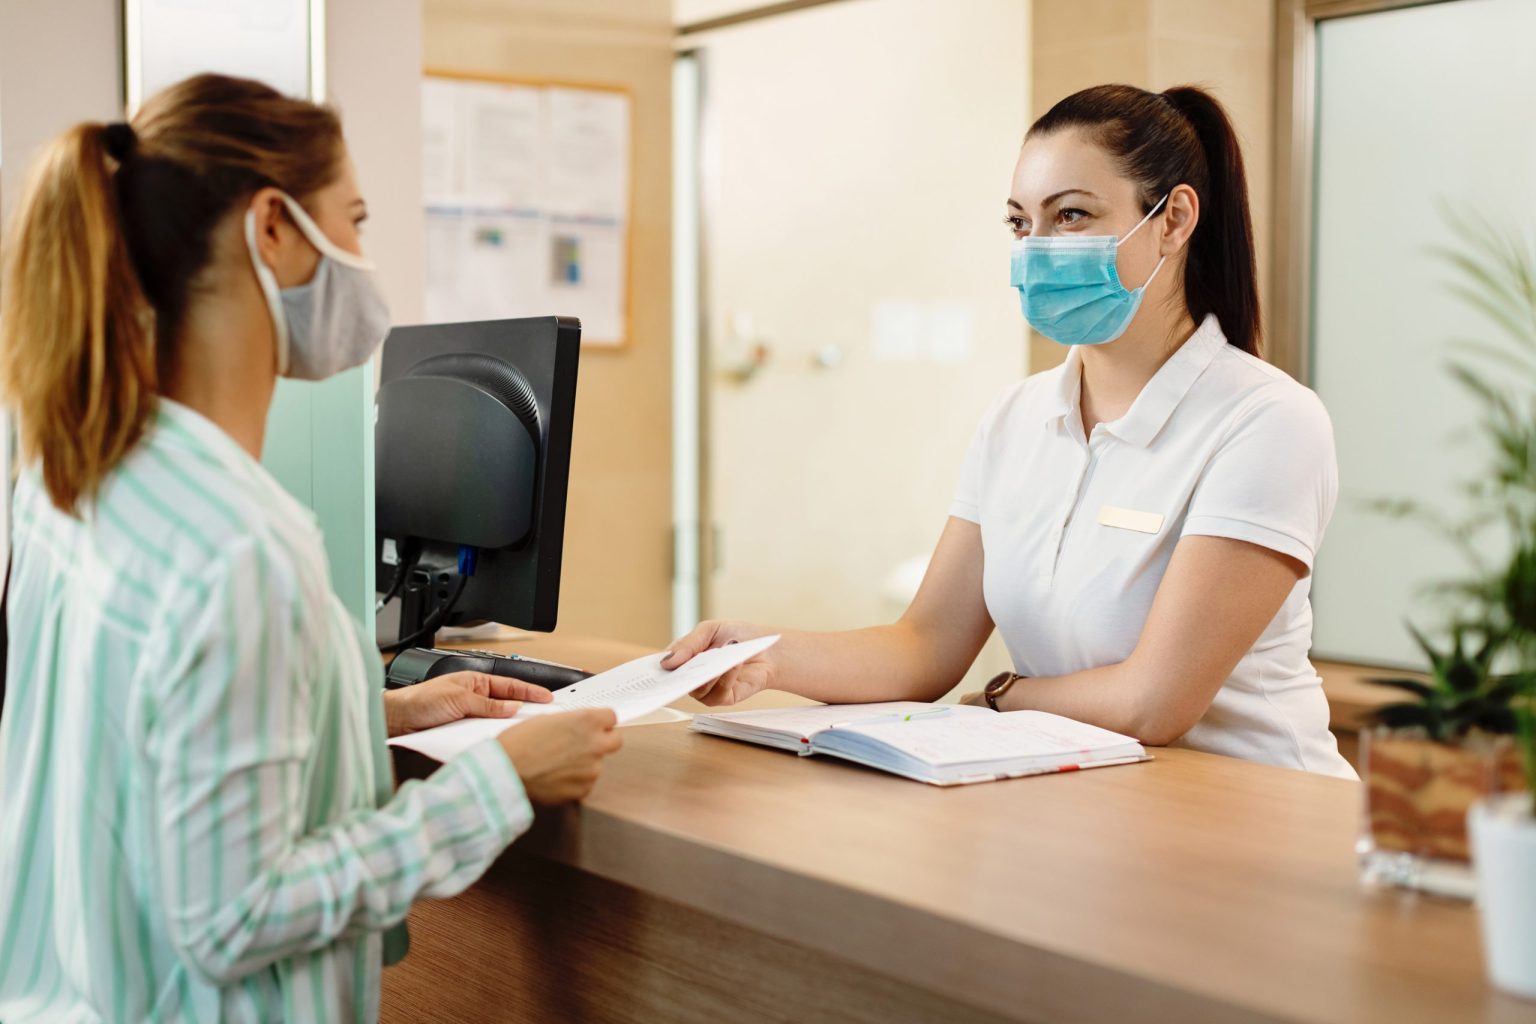 Medical Assistant wearing a mask and handing out a paper to a coworker who is also wearing a mask.